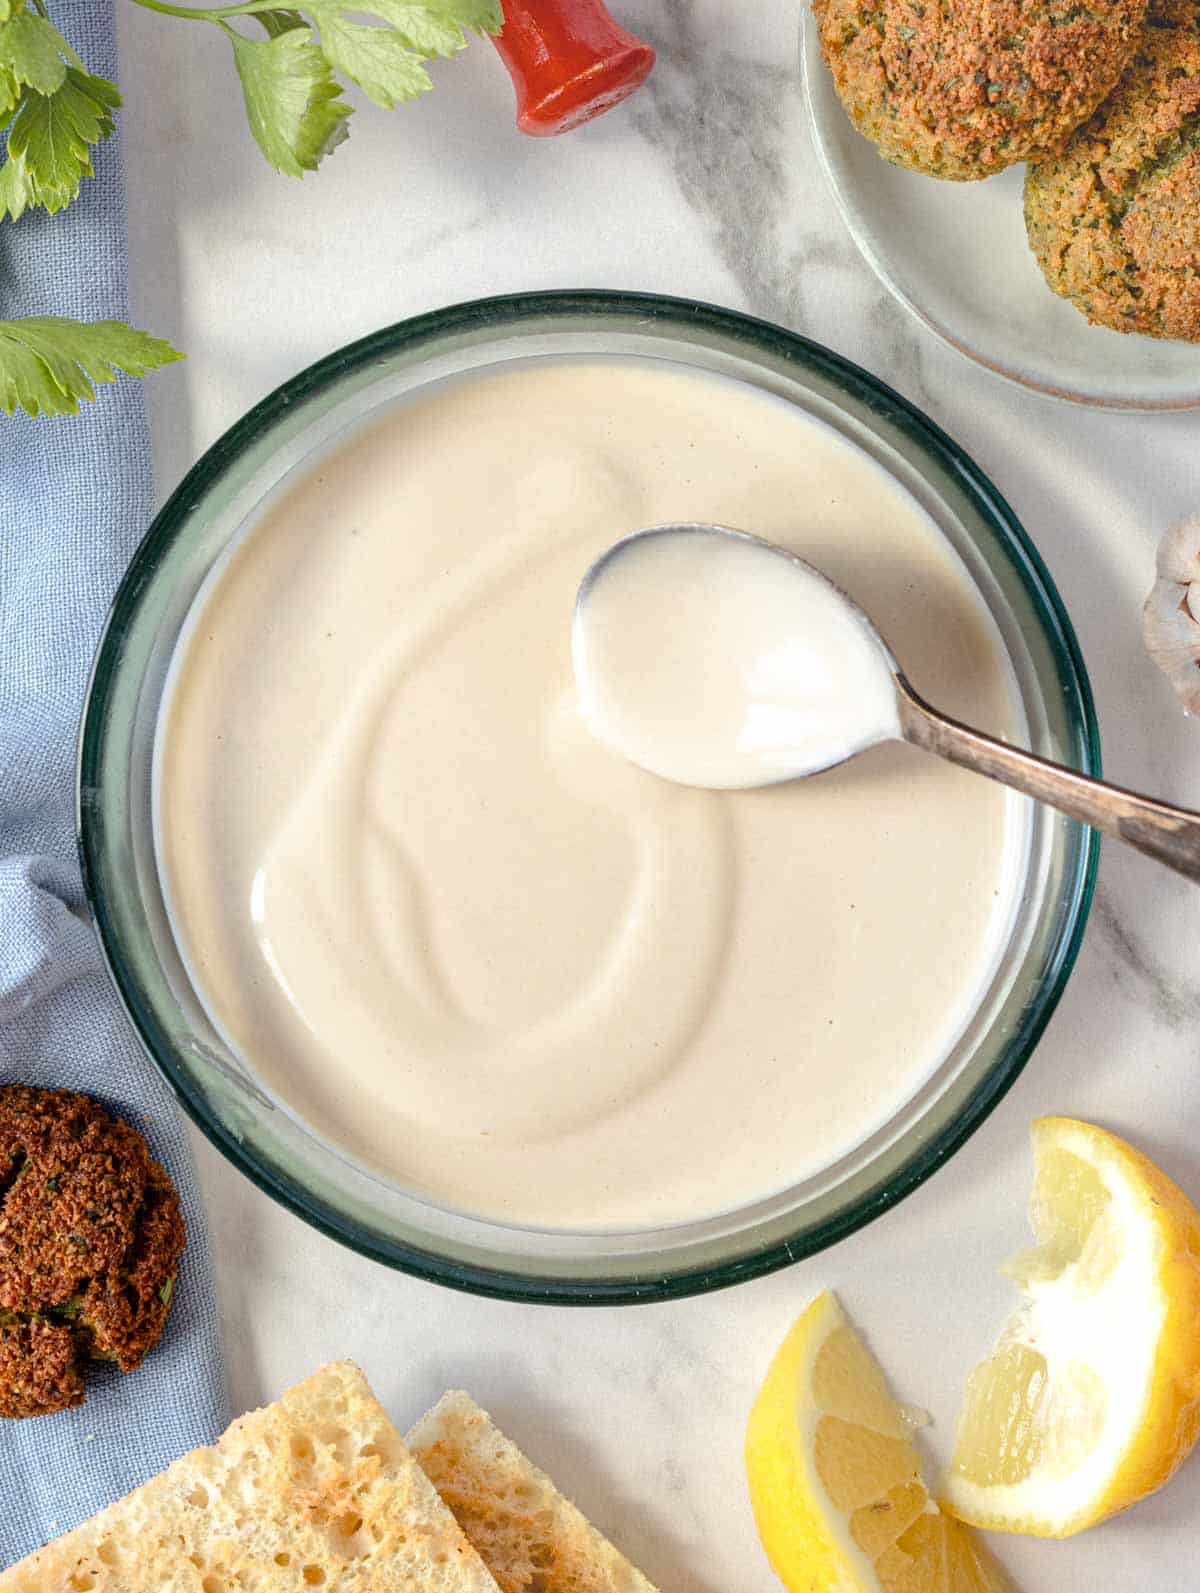 Tahini sauce in a glass bowl with a small silver spoon and lemon wedges